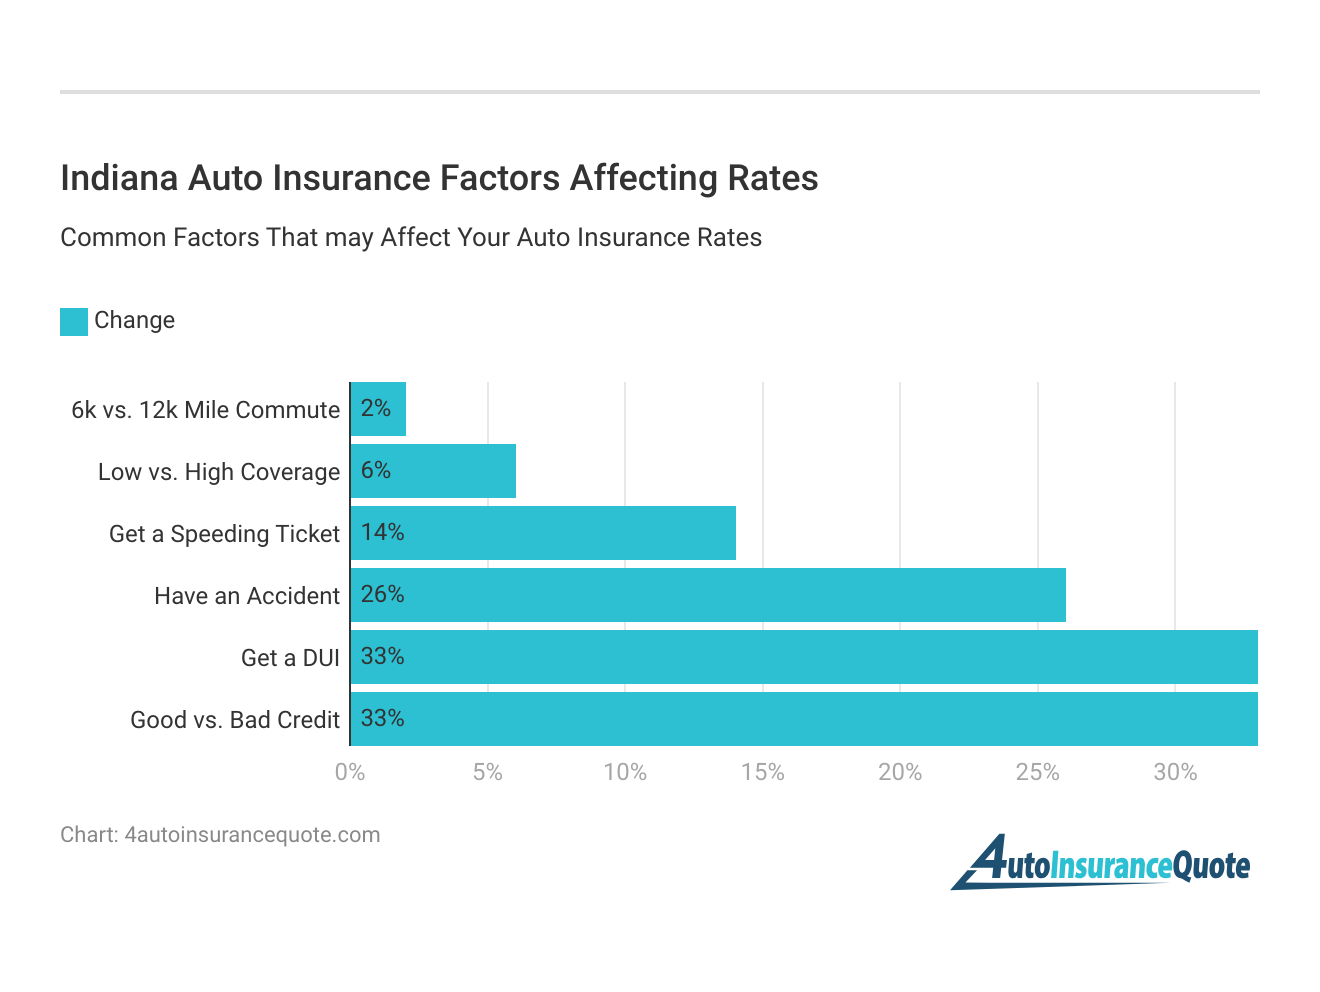 <h3>Indiana Auto Insurance Factors Affecting Rates</h3>